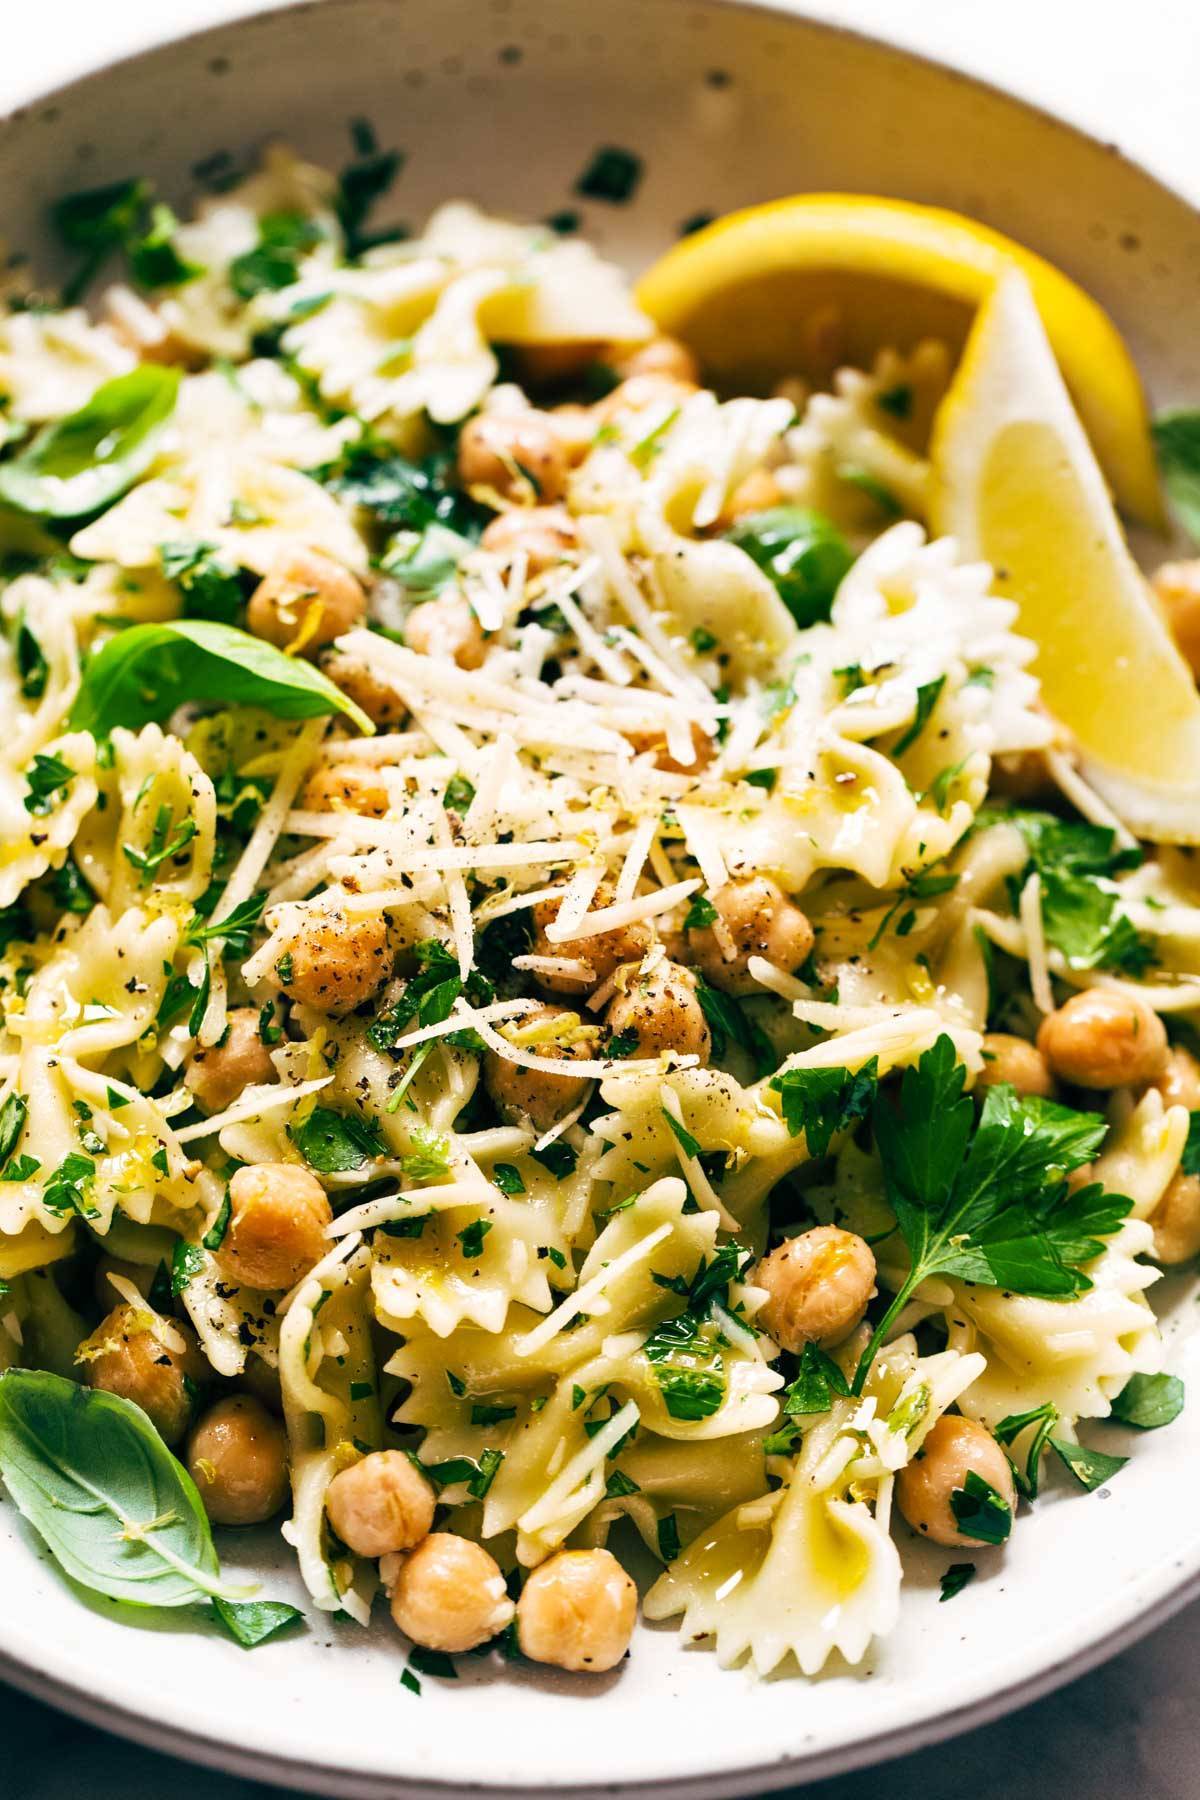 Lemon Herb Pasta Salad with Marinated Chickpeas in a bowl.